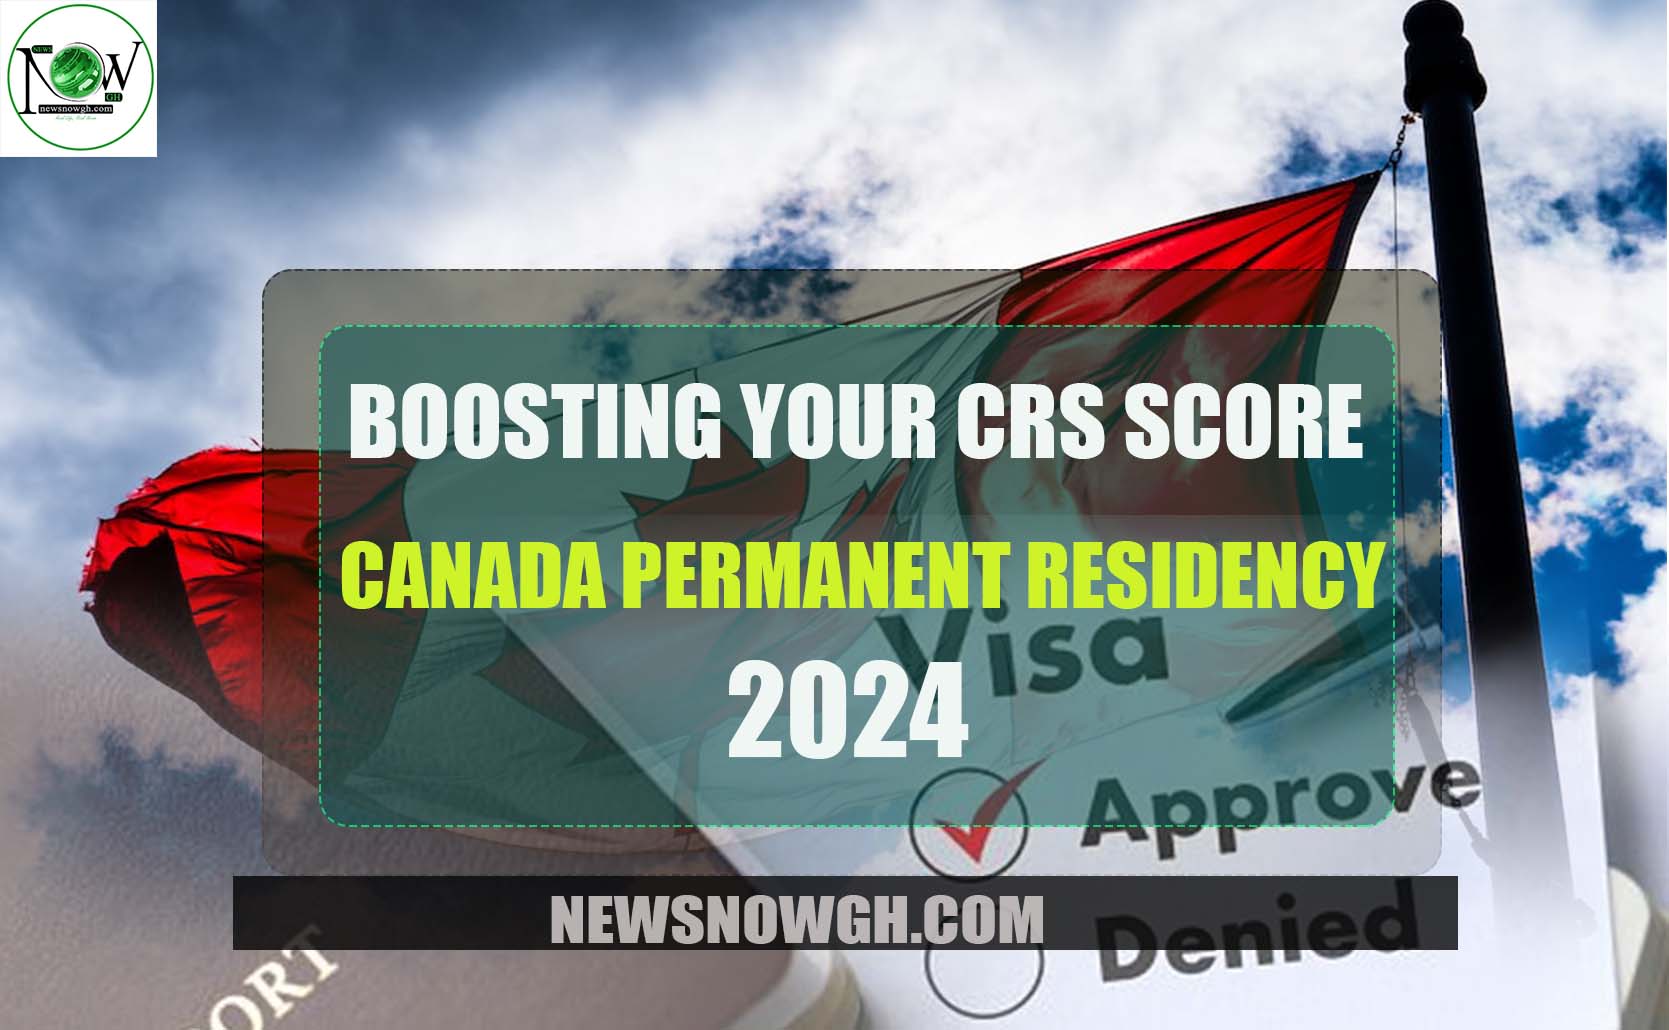 Canada Permanent Residency 2024 Boosting Your CRS Score